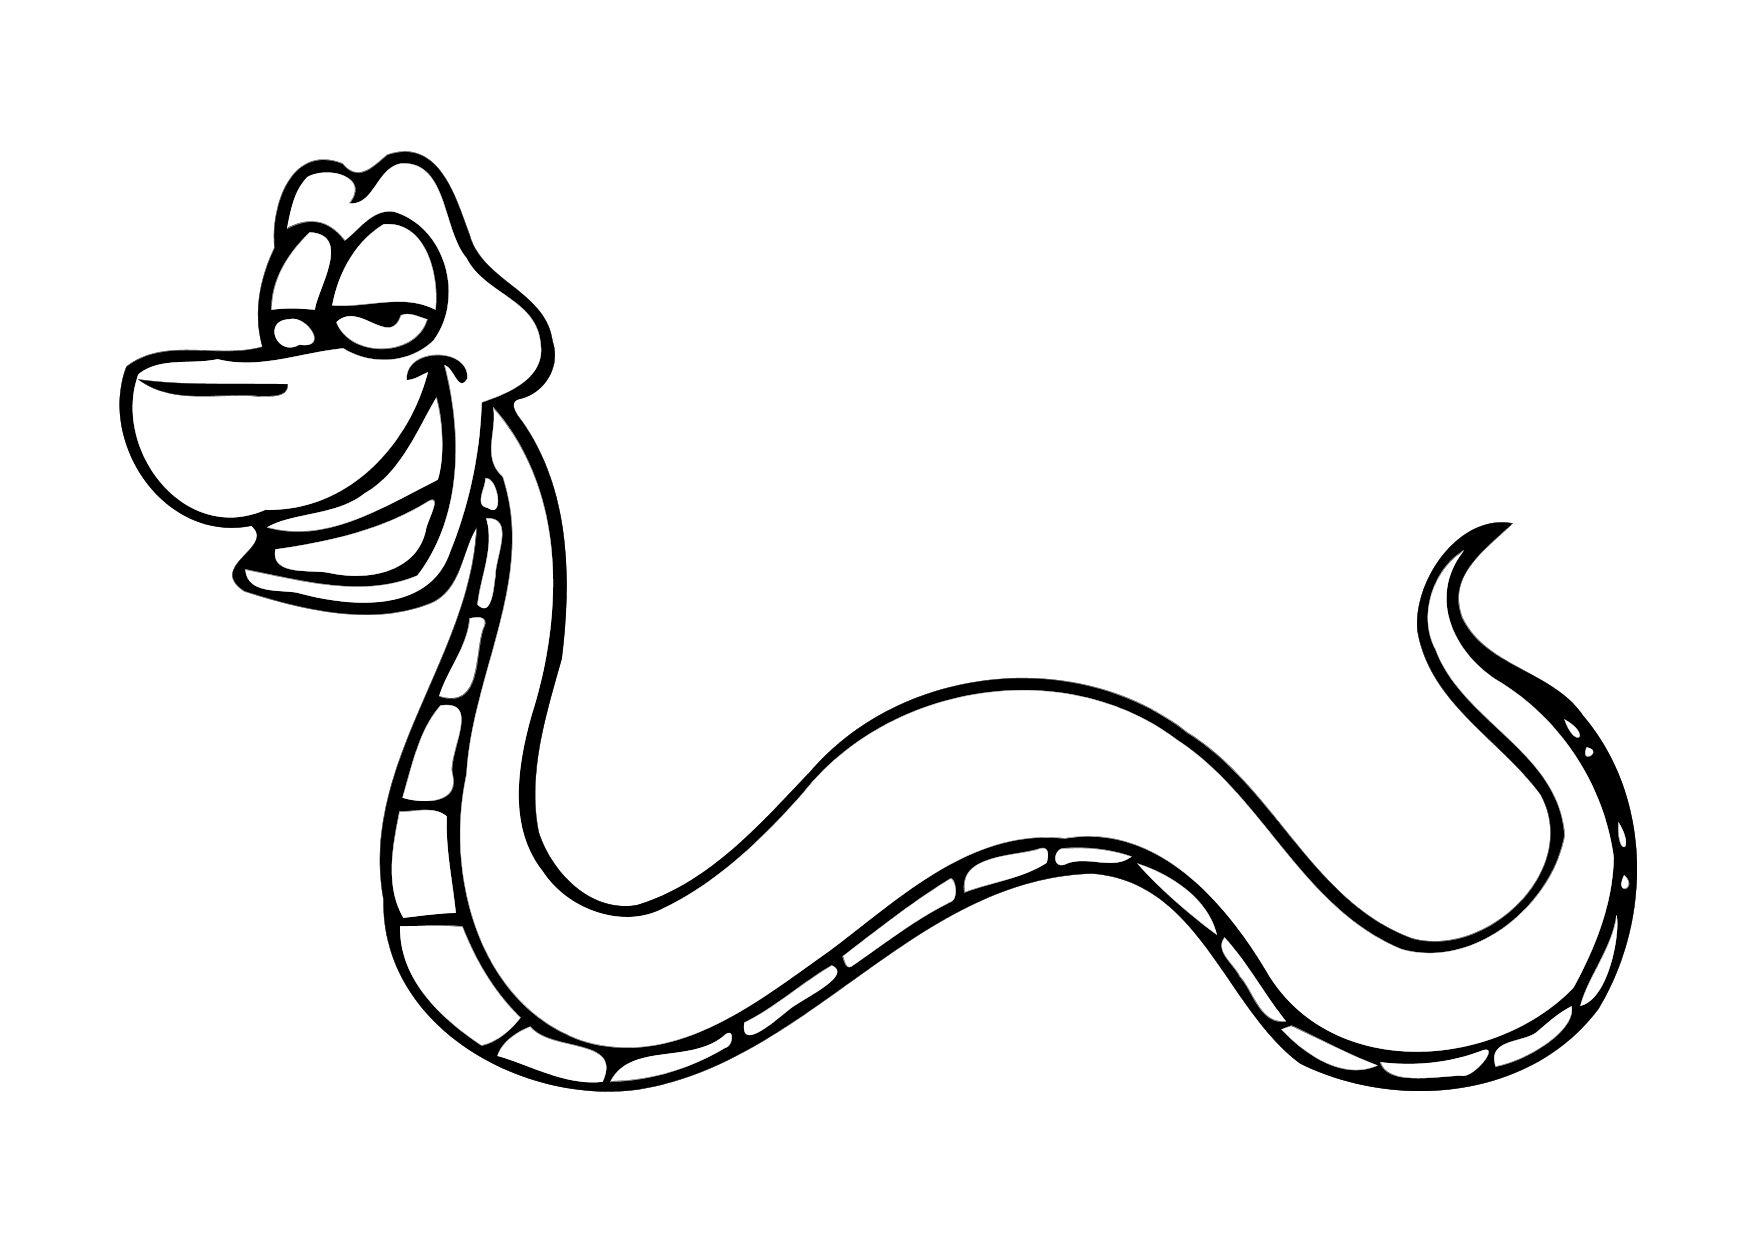 Snake Drawing 19073 Hd Wallpapers in Animals - Imagesci.